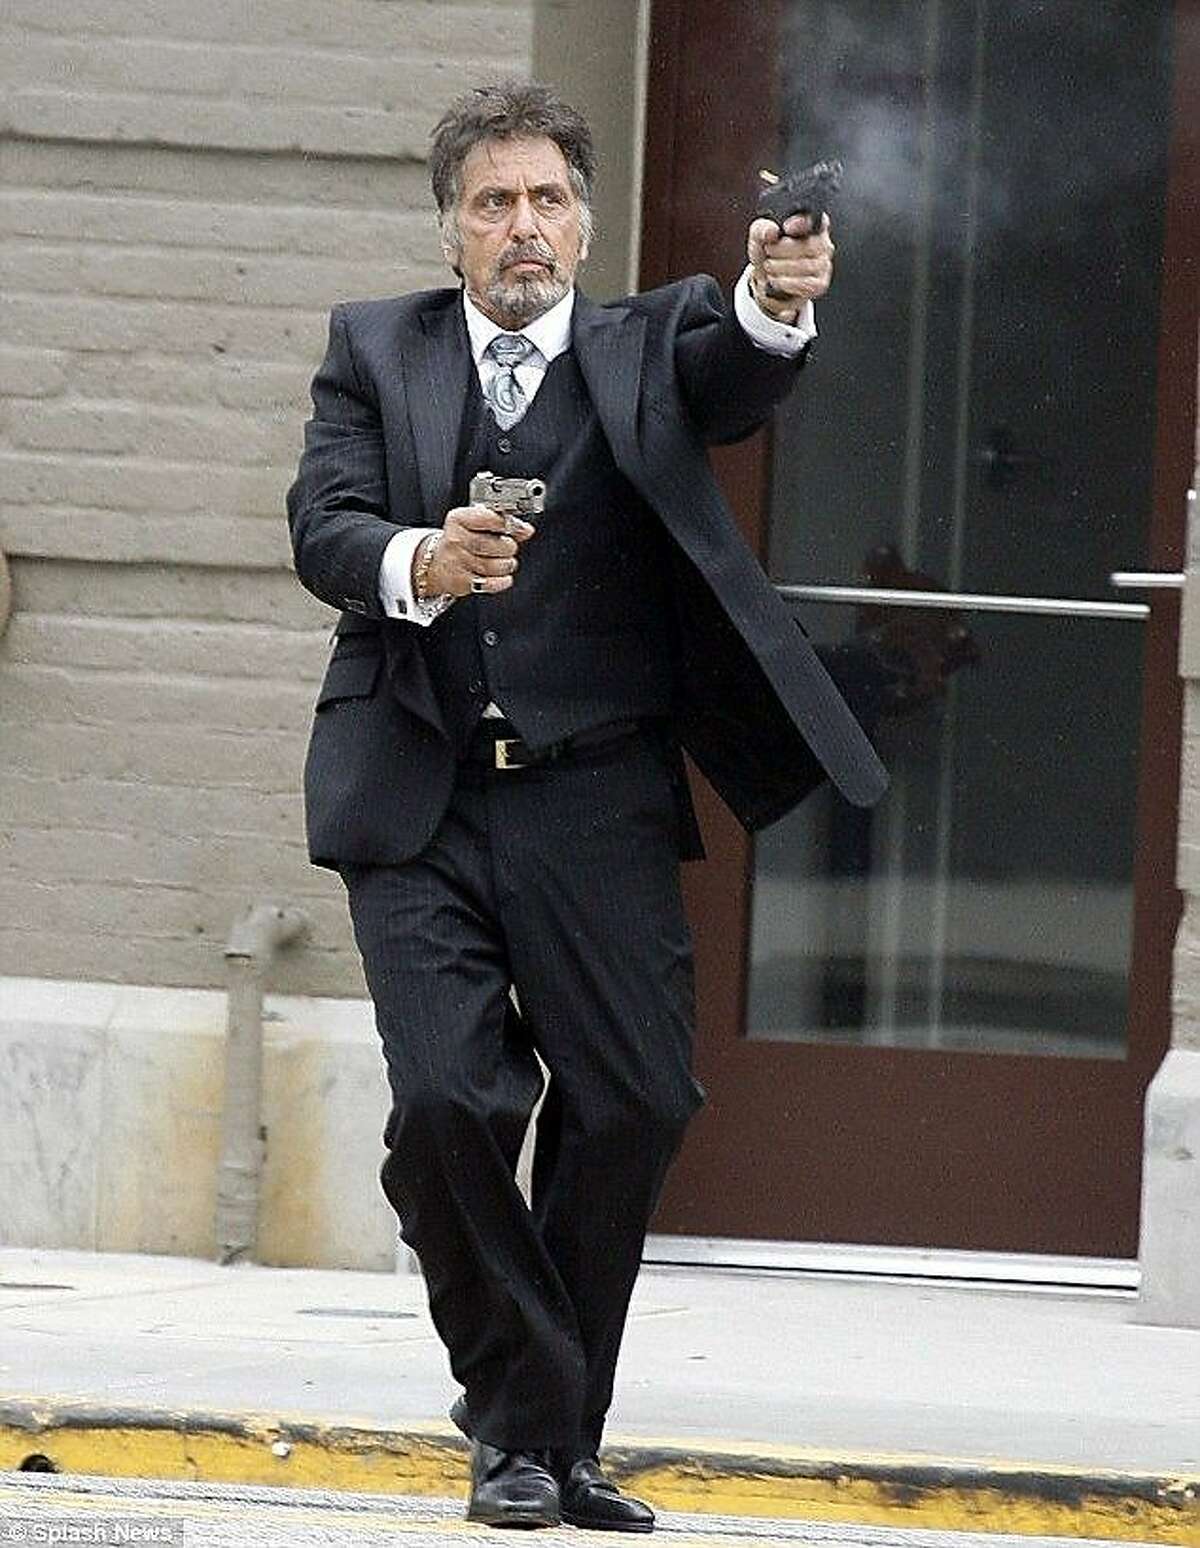 Al Pacino in "Stand-Up Guys." (2013)